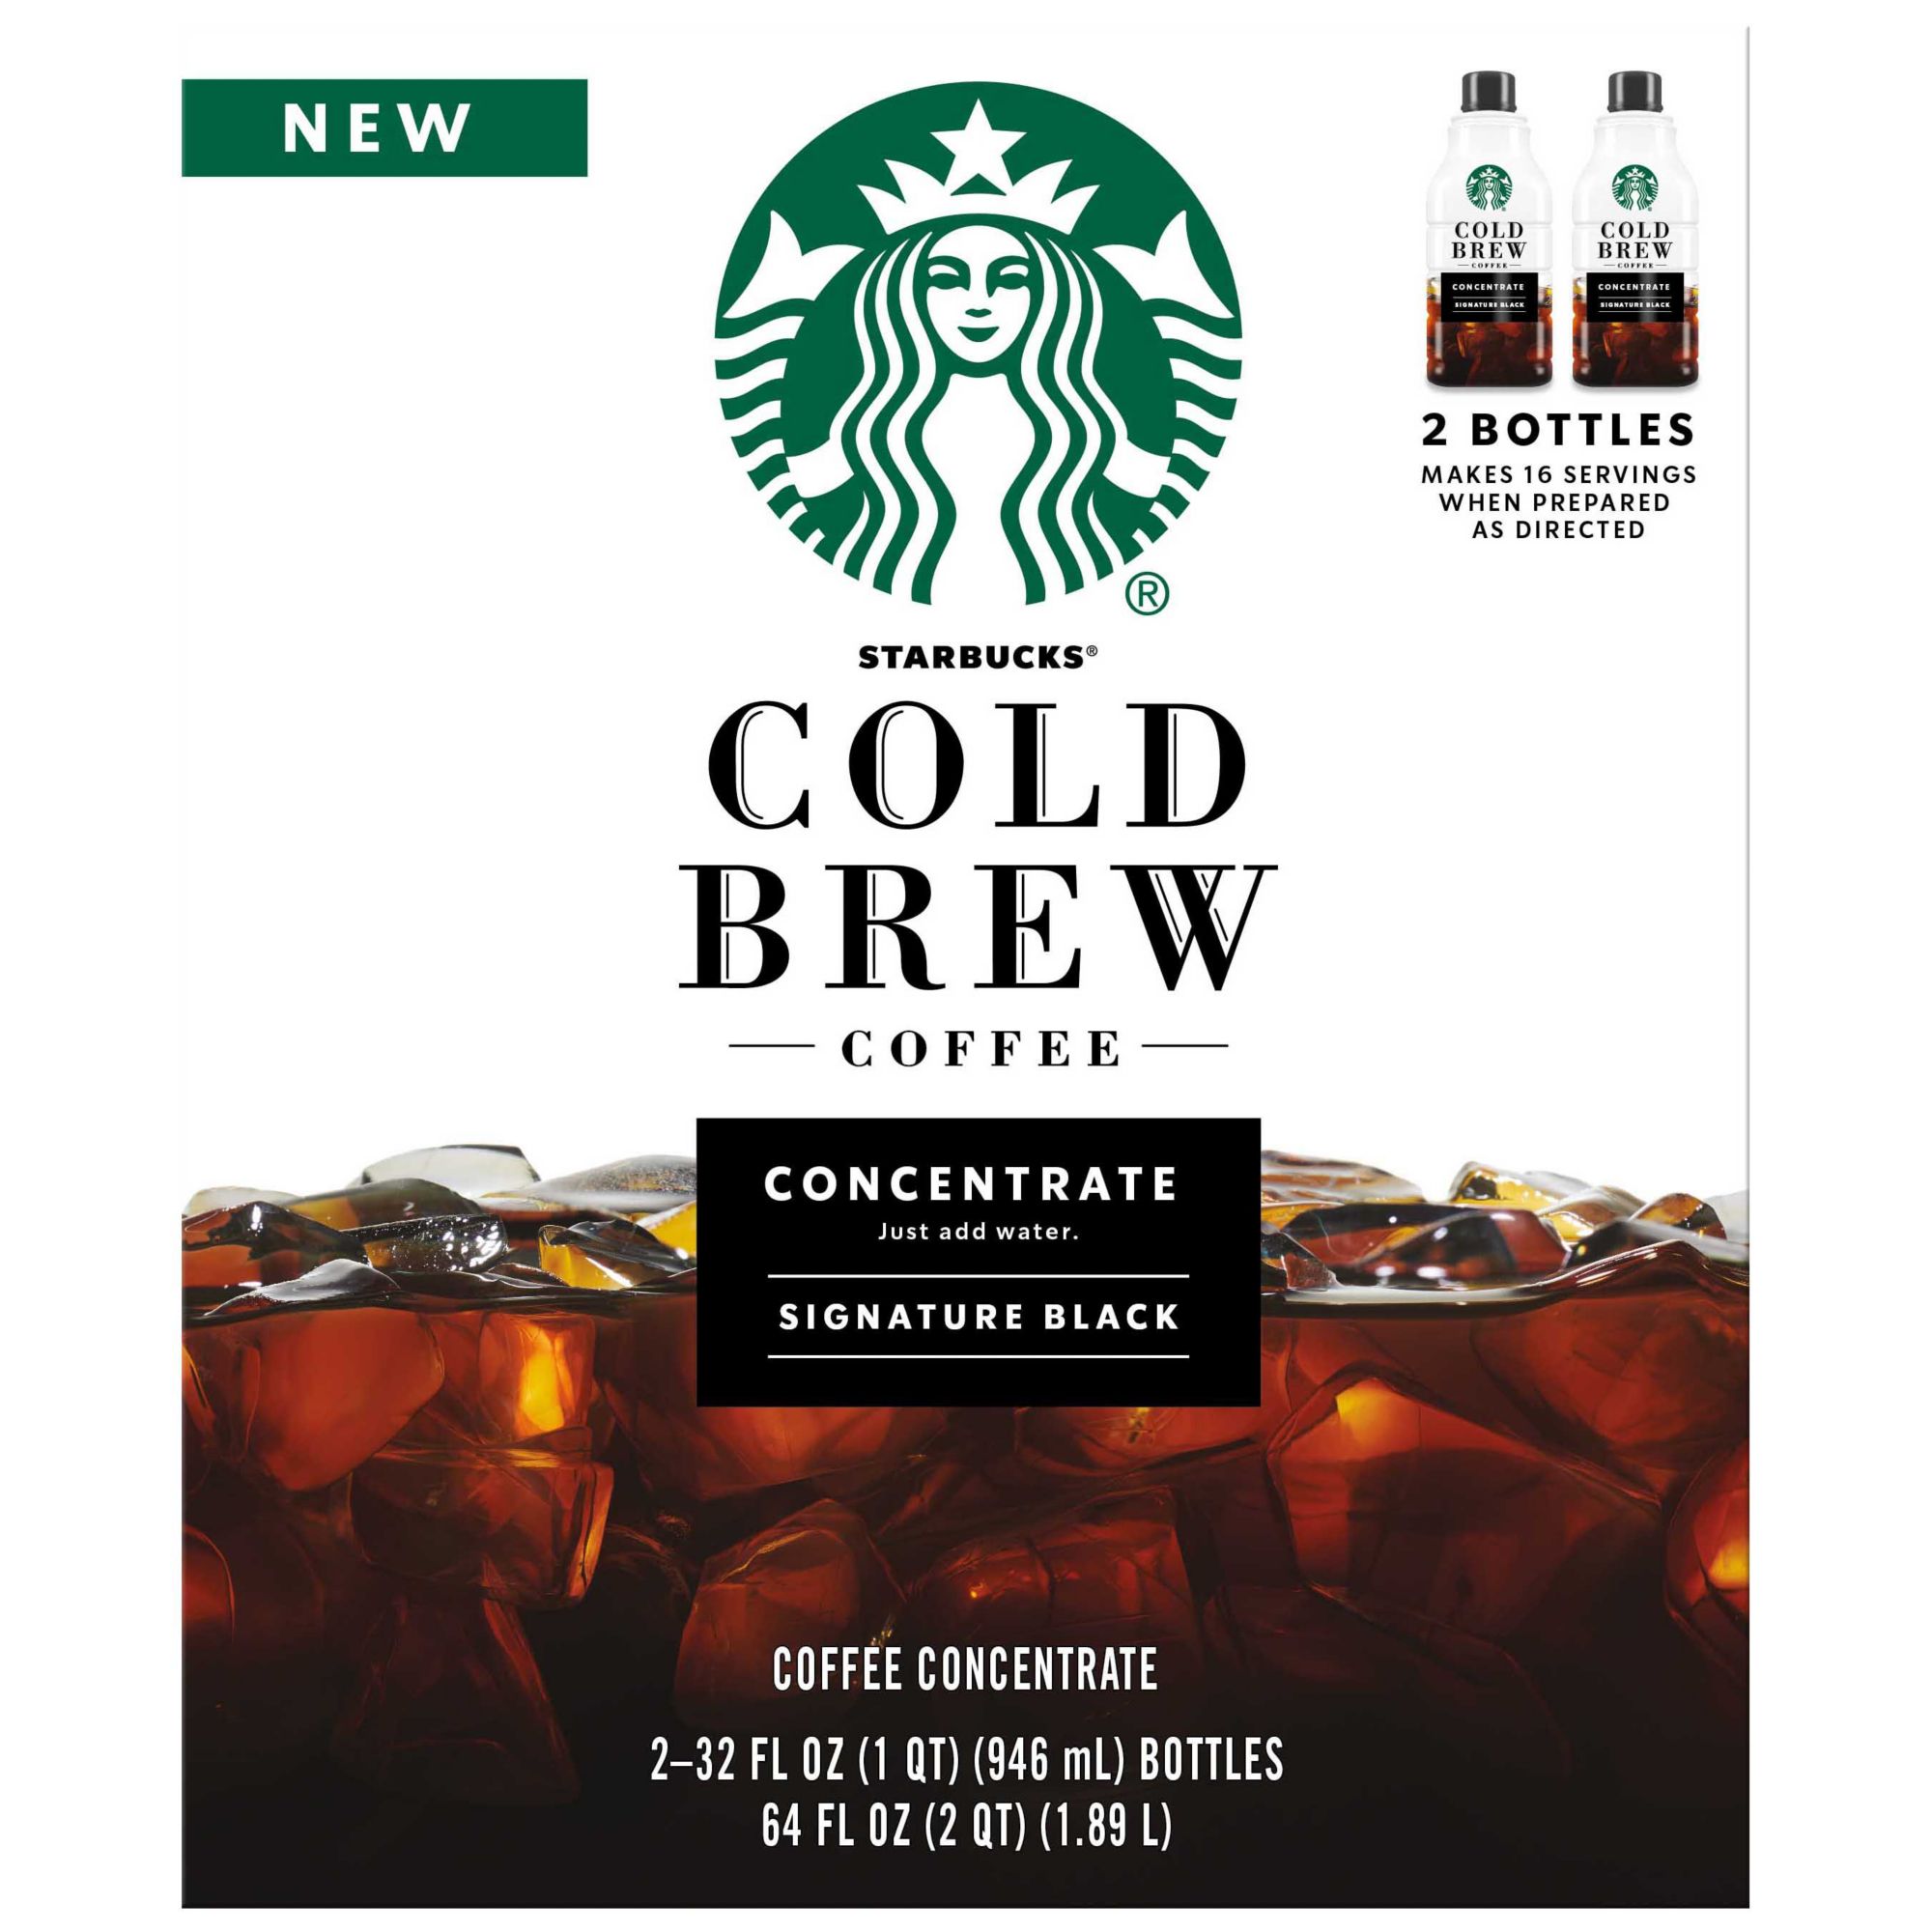 Starbucks Cold Brew Coffee Concentrate Bottles, 2 pk./32 fl. oz.